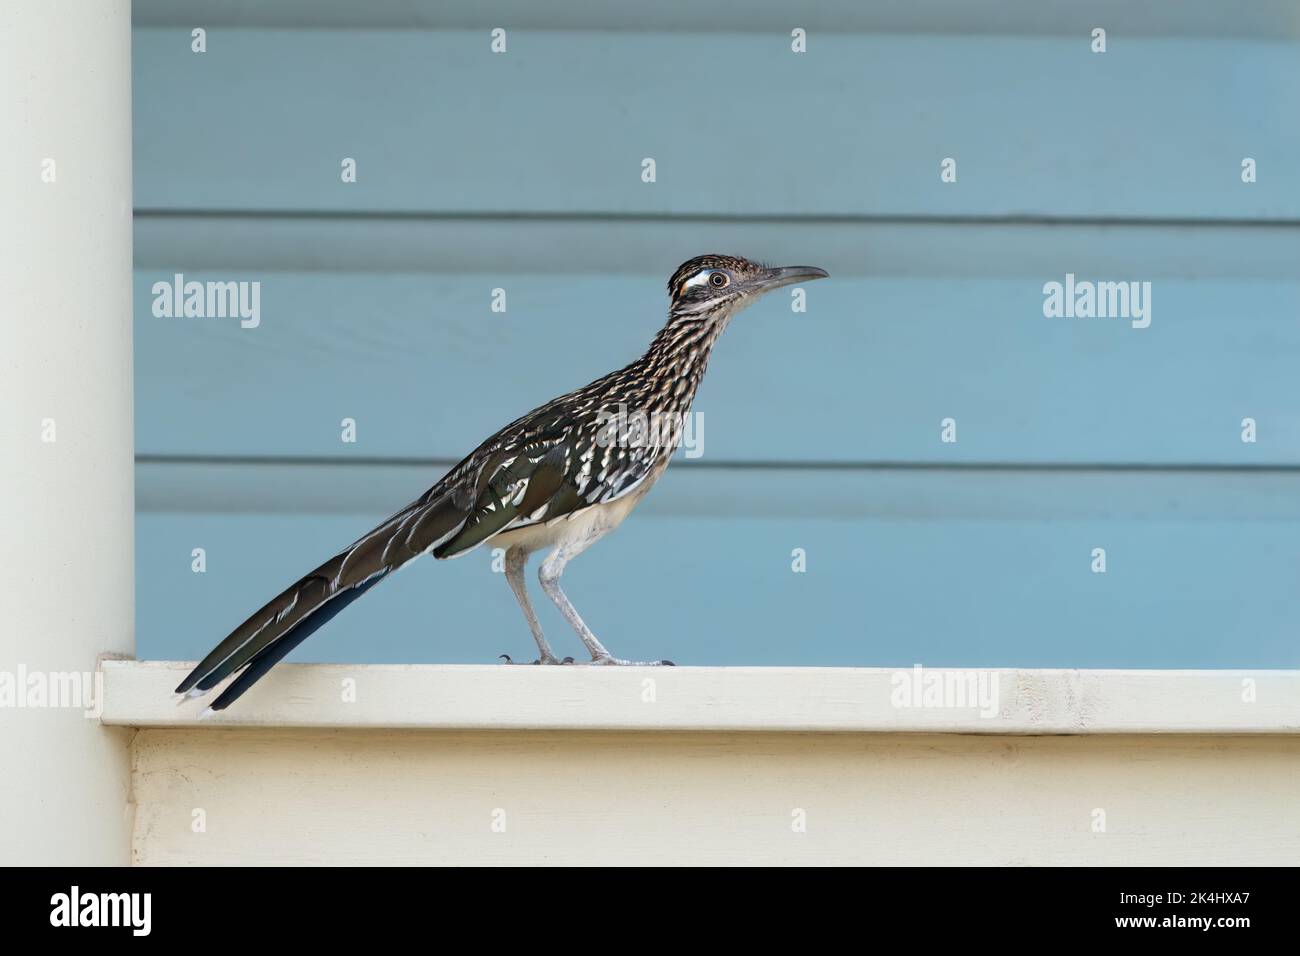 A Greater roadrunner perches on porch railing at Mitchell Lake, San Antonio, Texas. Stock Photo